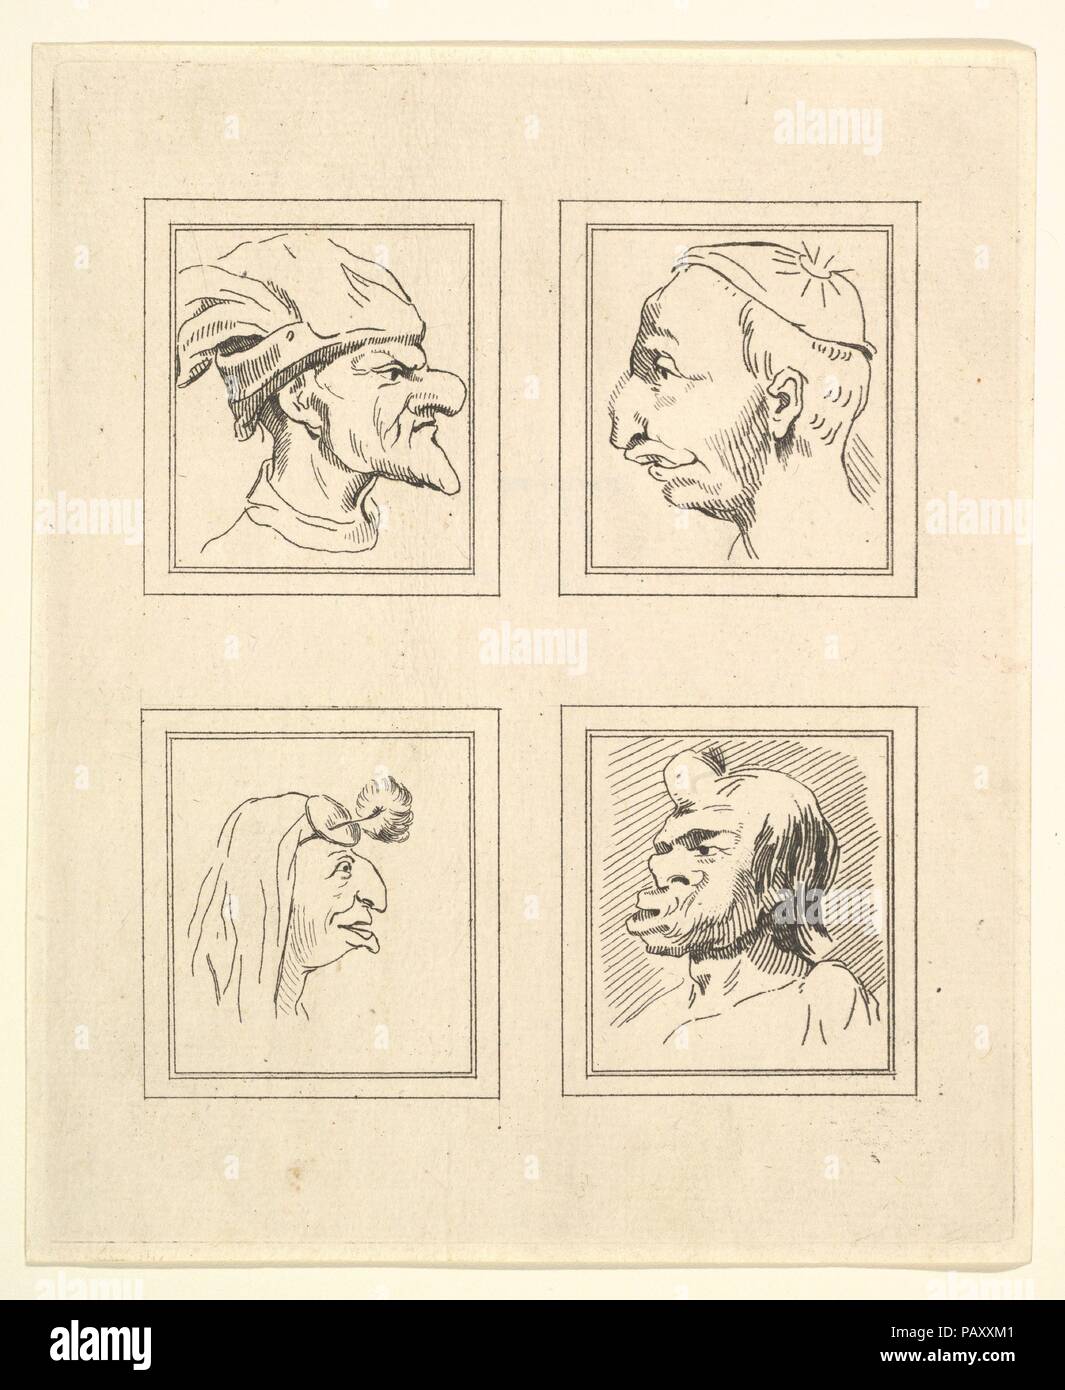 Four Heads (from Characaturas by Leonardo da Vinci, from Drawings by Wincelslaus Hollar, out of the Portland Museum). Artist: After Wenceslaus Hollar (Bohemian, Prague 1607-1677 London); After Leonardo da Vinci (Italian, Vinci 1452-1519 Amboise). Dimensions: Plate: 7 11/16 x 6 5/16 in. (19.5 x 16 cm)  Sheet: 7 7/8 x 6 9/16 in. (20 x 16.7 cm). Publisher: Published London by John Clarke (British, active 1788-91). Date: 1786. Museum: Metropolitan Museum of Art, New York, USA. Stock Photo